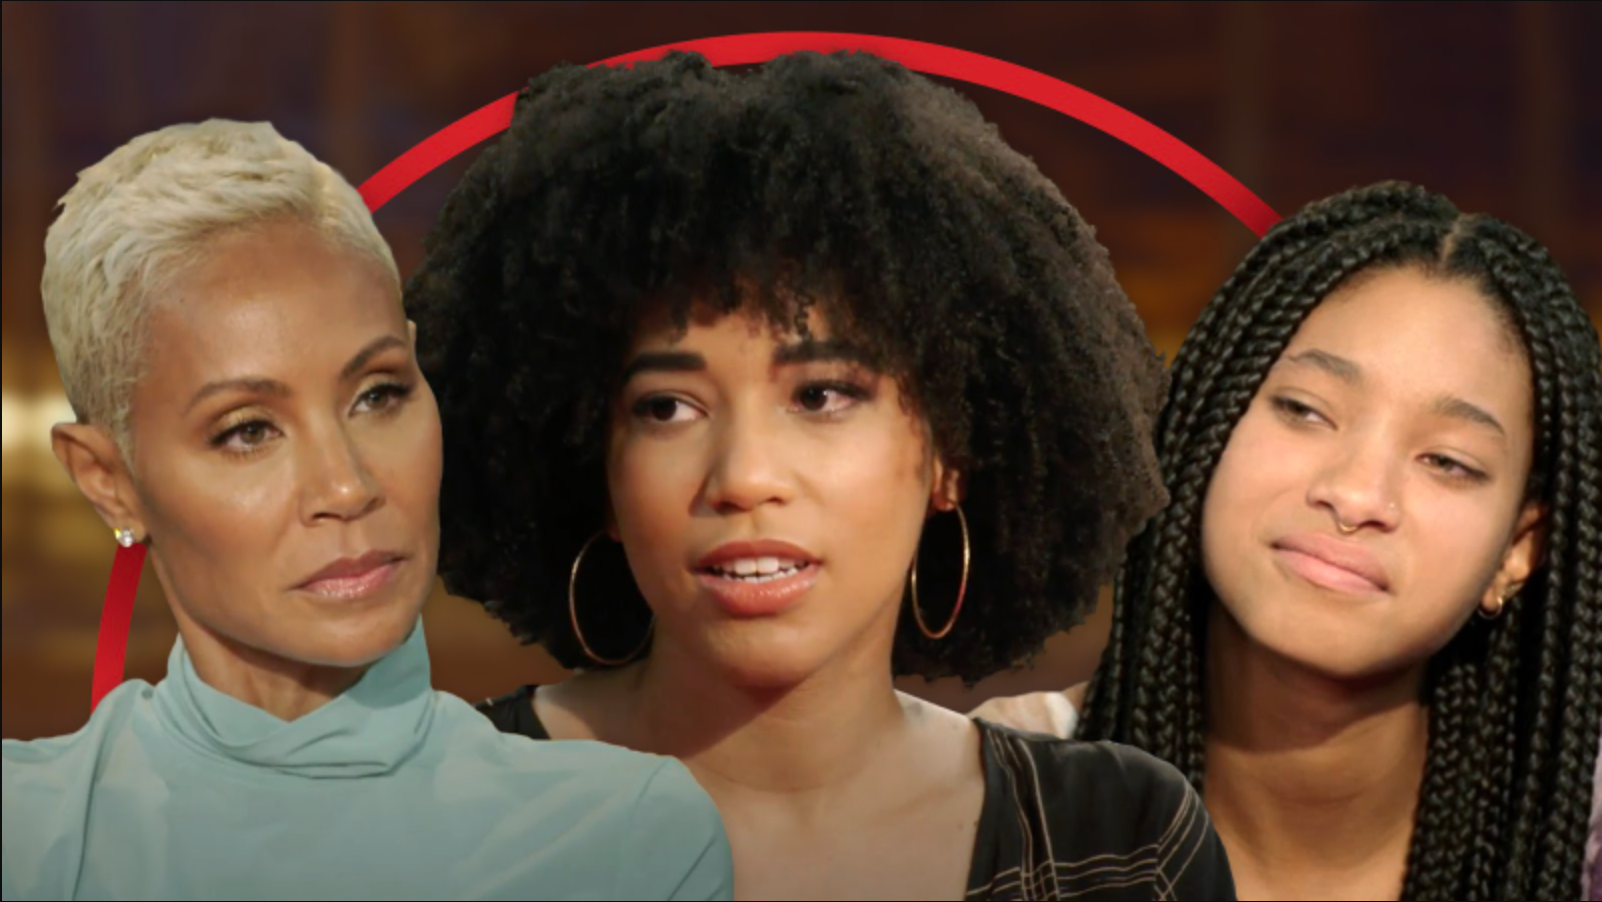 Willow Smith details her lifestyle on 'Red Table Talk': What you should know about polyamory